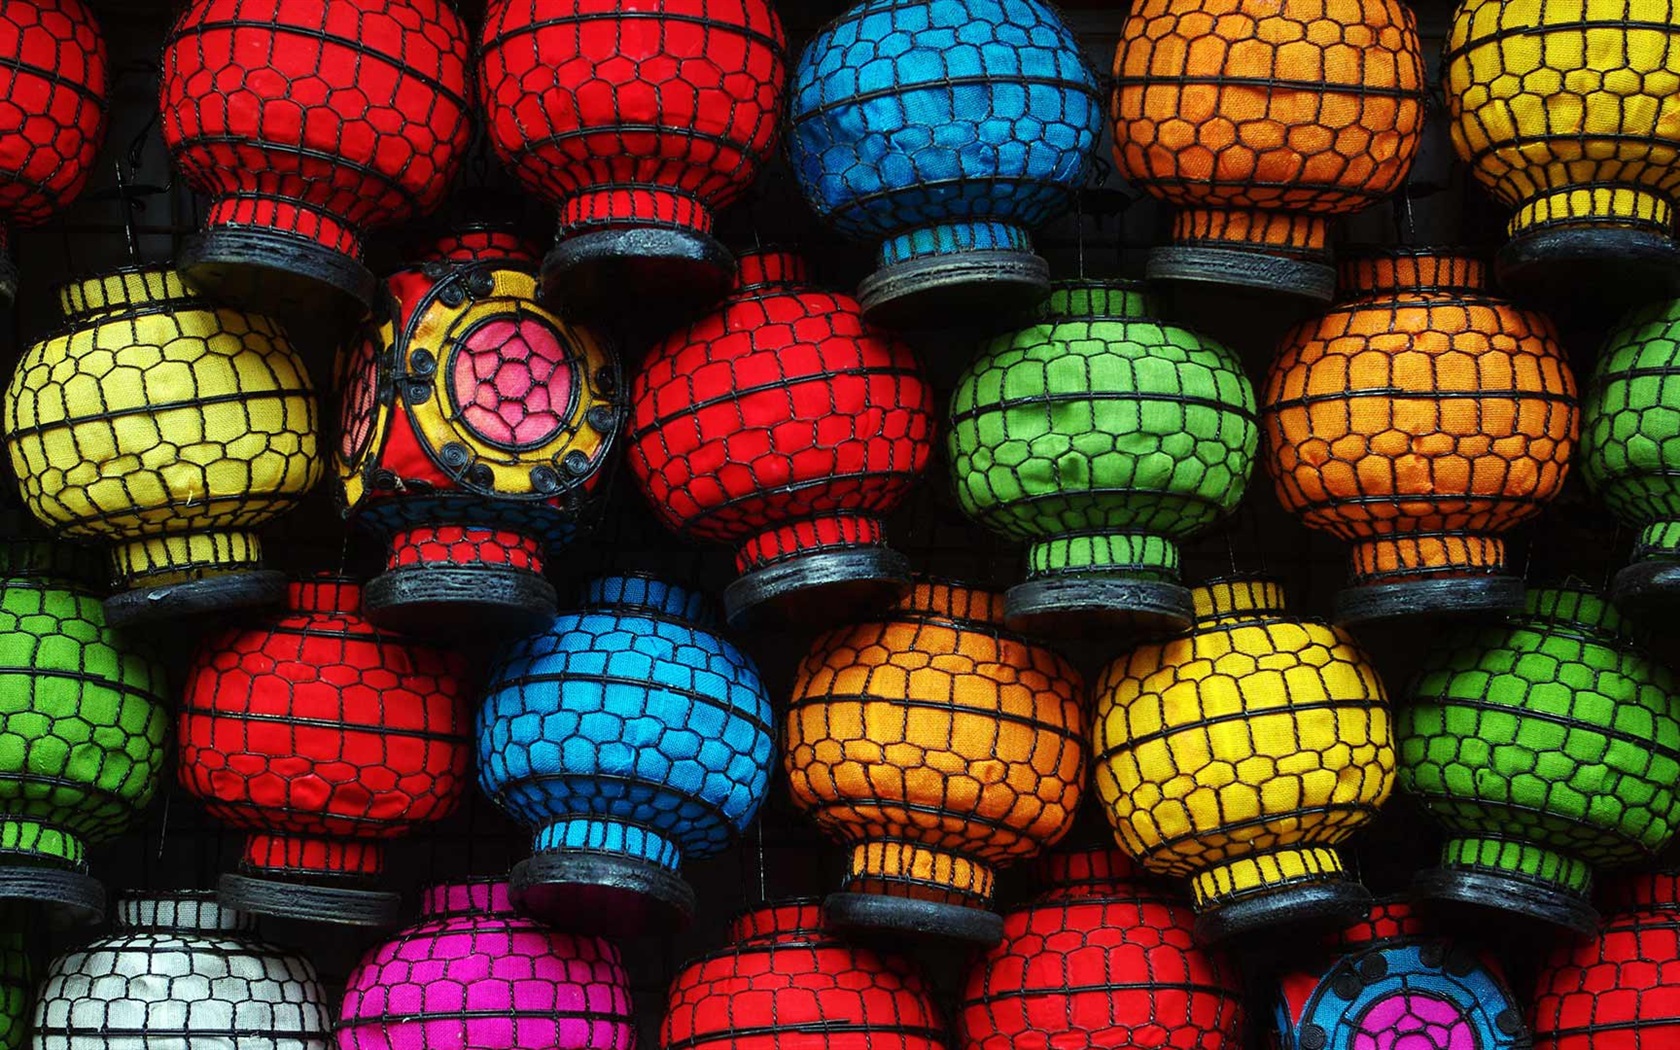 Wallpaper Colorful lanterns, Chinese culture 1920x1080 Full HD 2K Picture, Image